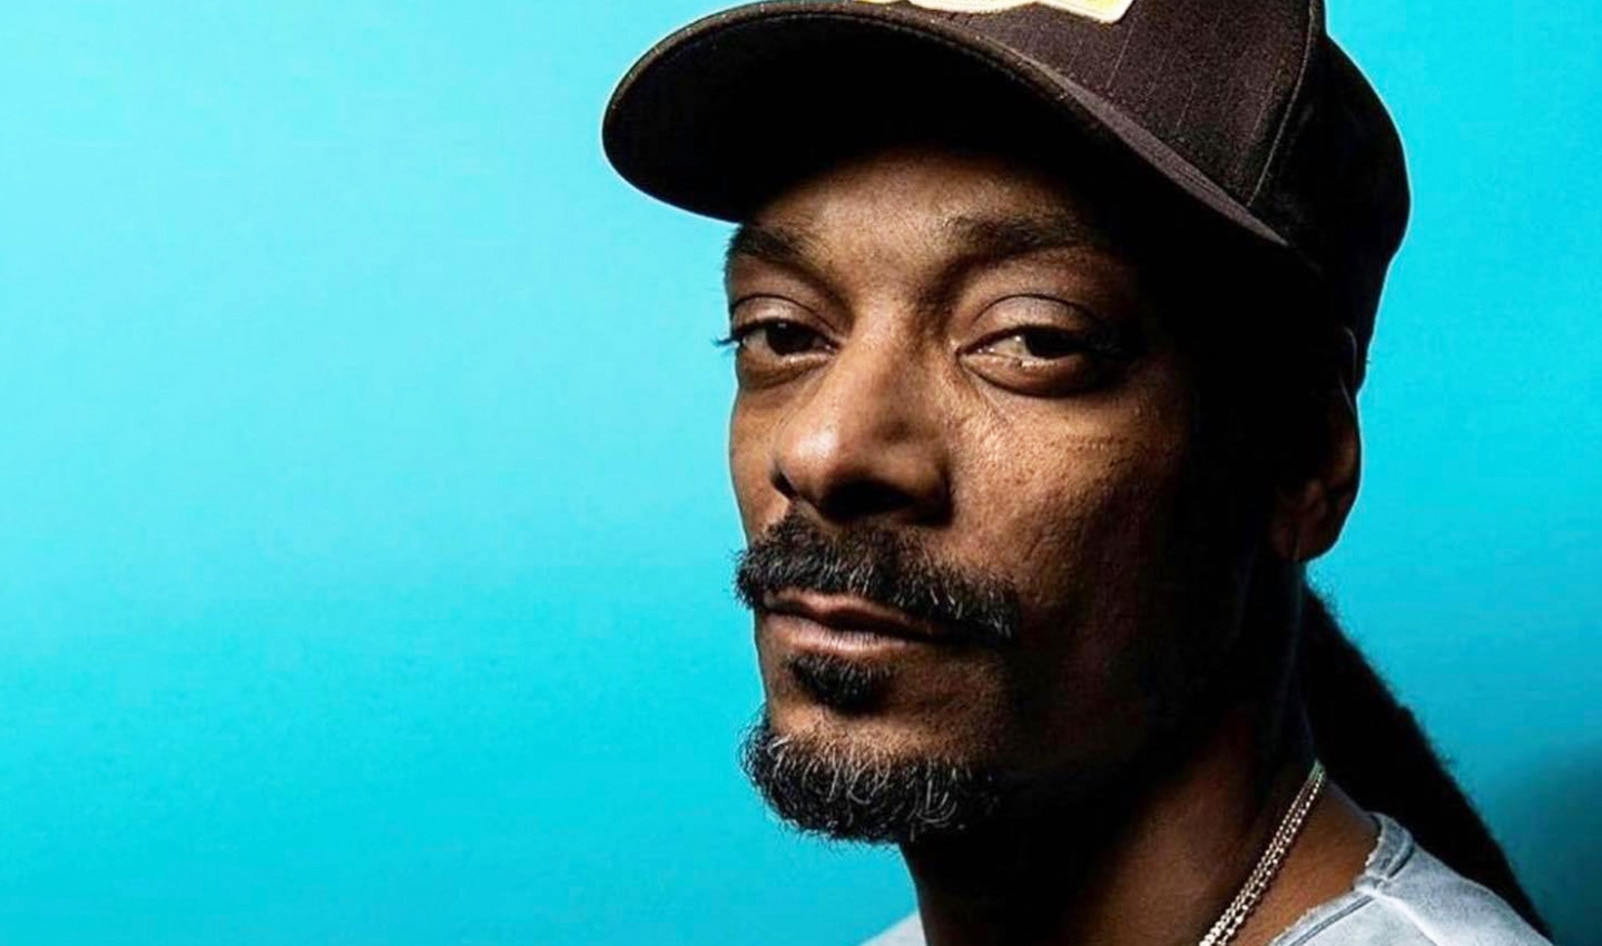 Snoop Dogg’s Vegan Friends Are Helping Him “Switch Up” His Diet